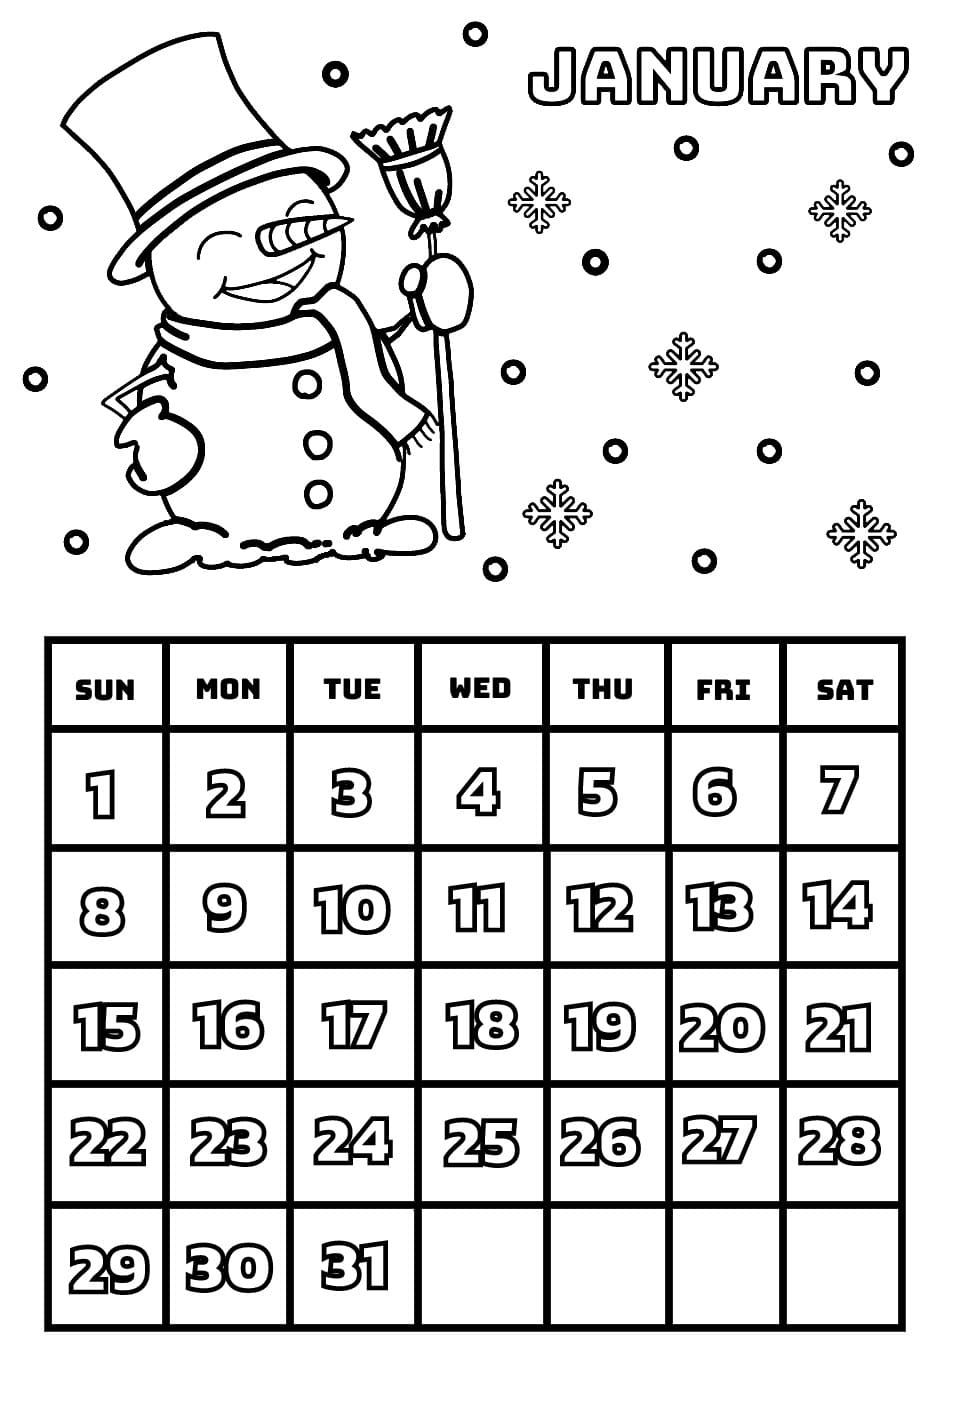 January Calendar coloring page Download, Print or Color Online for Free